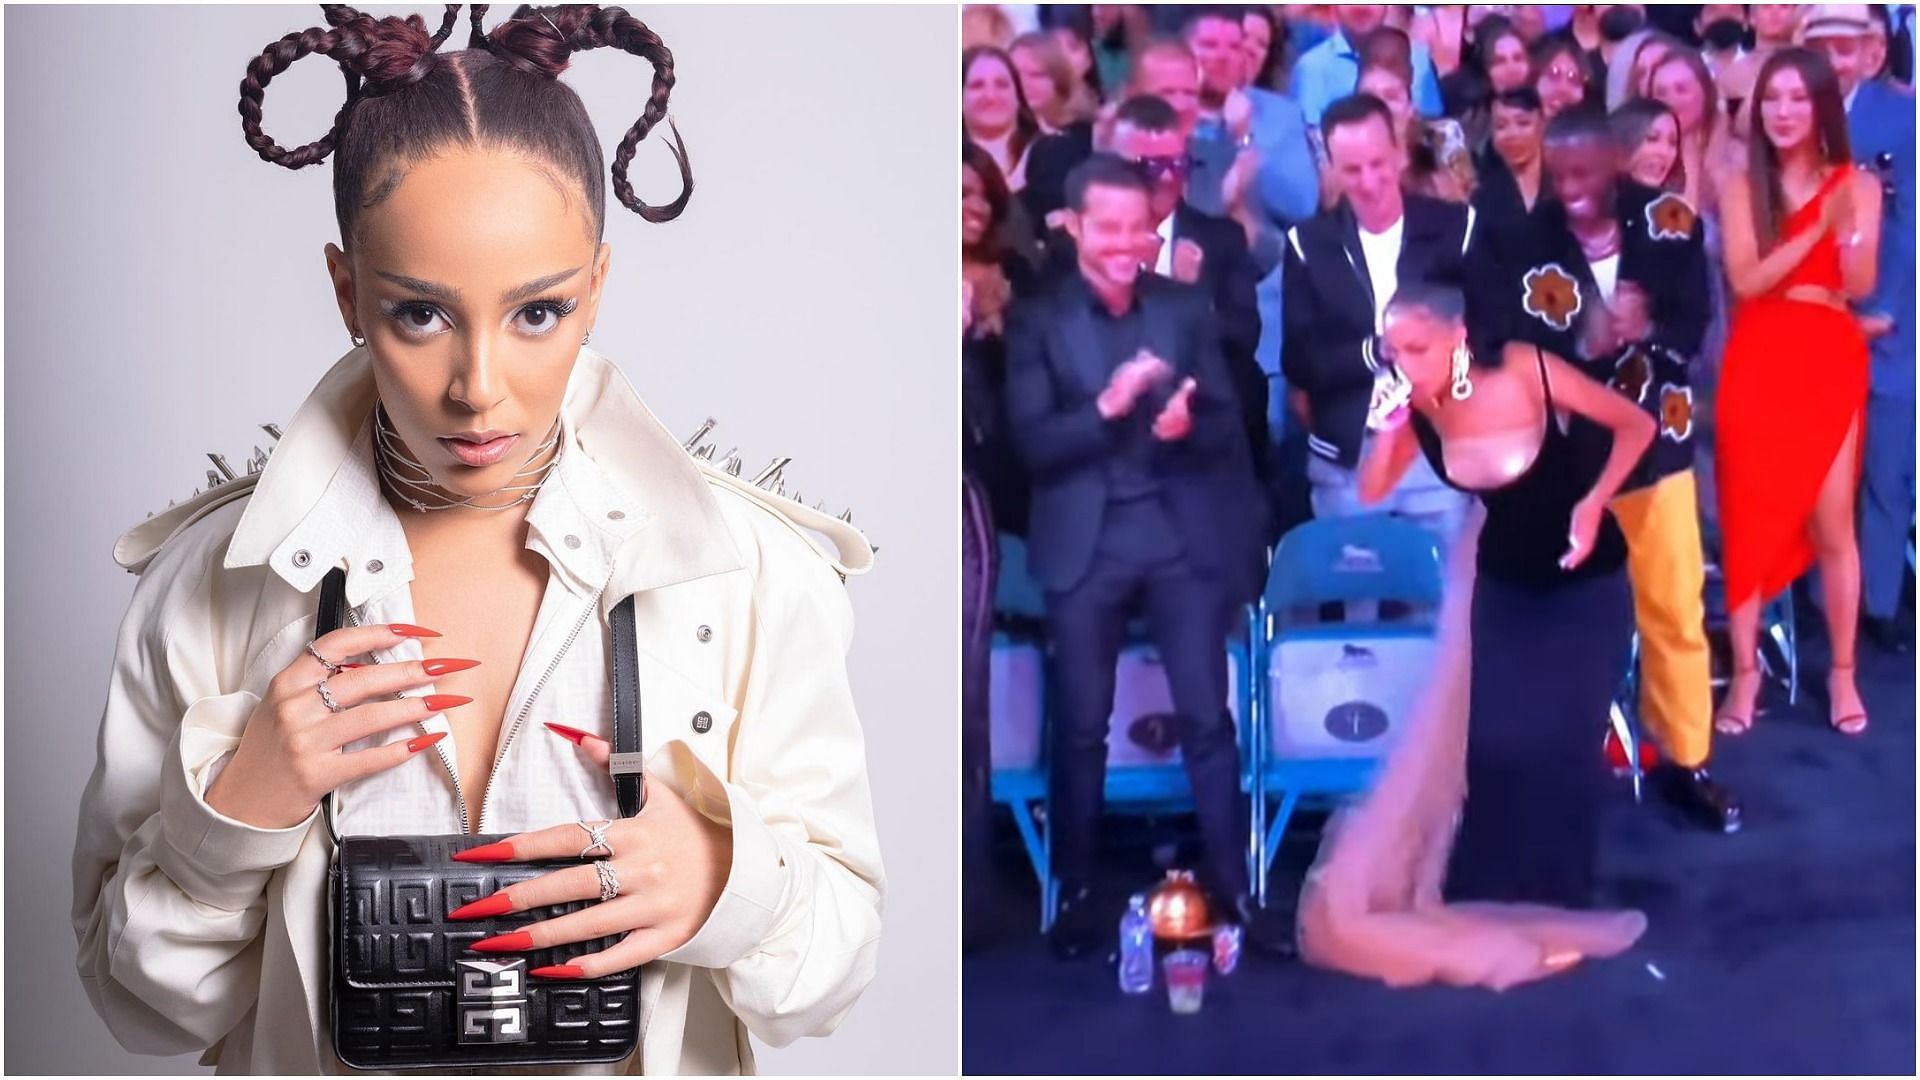 Doja Cat stopped to smoke her vape before accepting the award at the Billboard Music Awards (Image via @dojacat/Instagram and @ken88/YouTube )